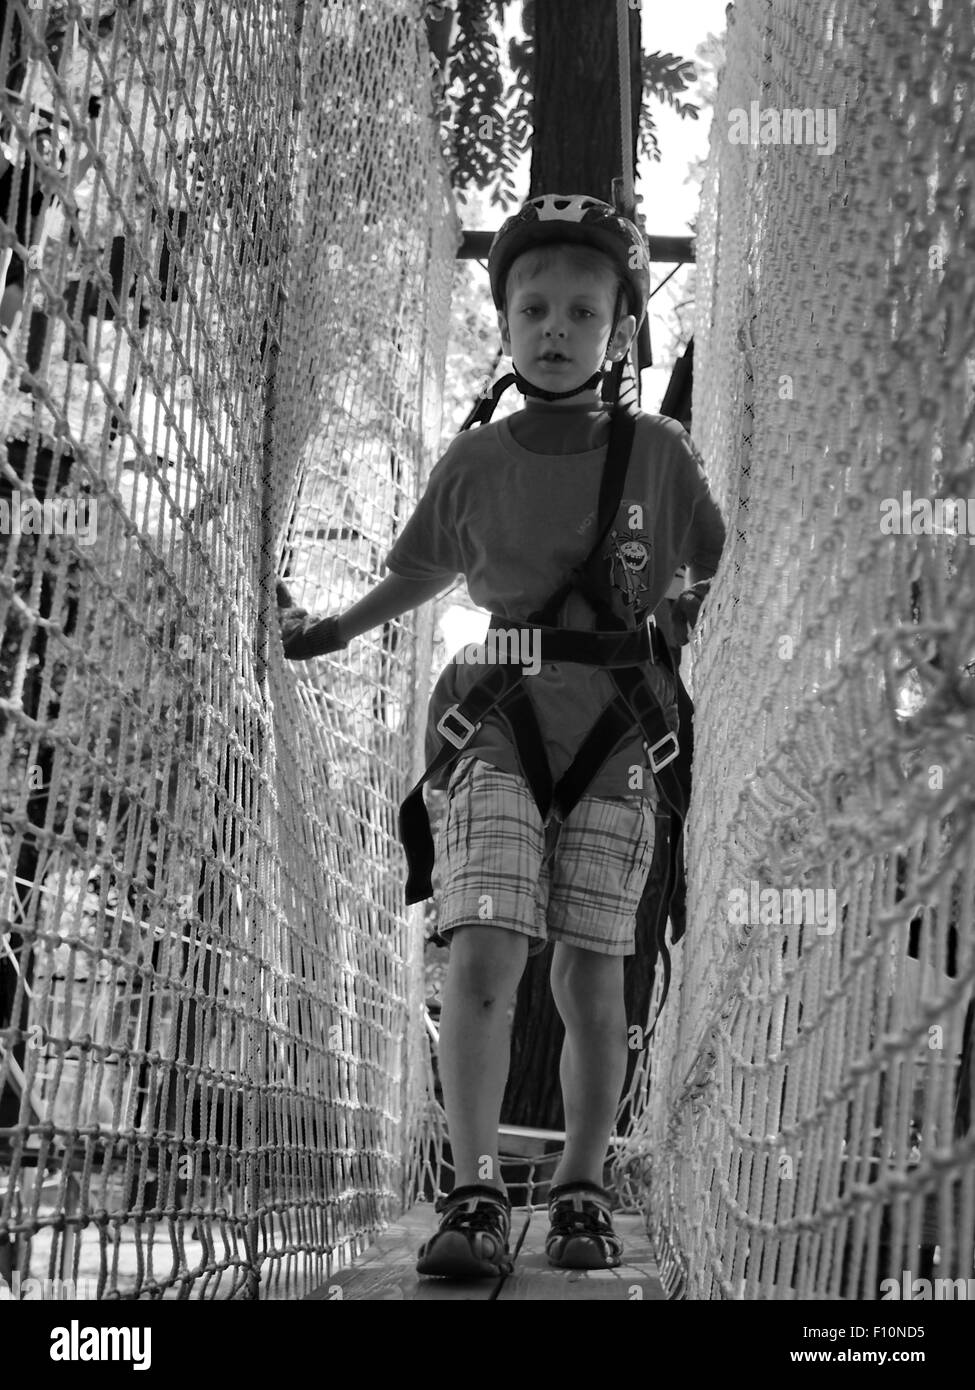 Kiev, Ukraine. 24th Aug, 2015. Boy playing on the bungee in the suburbs of Kiev Borispol. -- Thousands of Ukrainians celebrate the 24 anniversary of Independence of Ukraine mass festivities in towns and villages across the country. This holiday marred by Russian aggression in the east of Ukraine and the occupation of the Crimea. Ukrainians are hoping that 25 Independence Day they will meet in a more peaceful environment. © Igor Golovnov/Alamy Live News Stock Photo